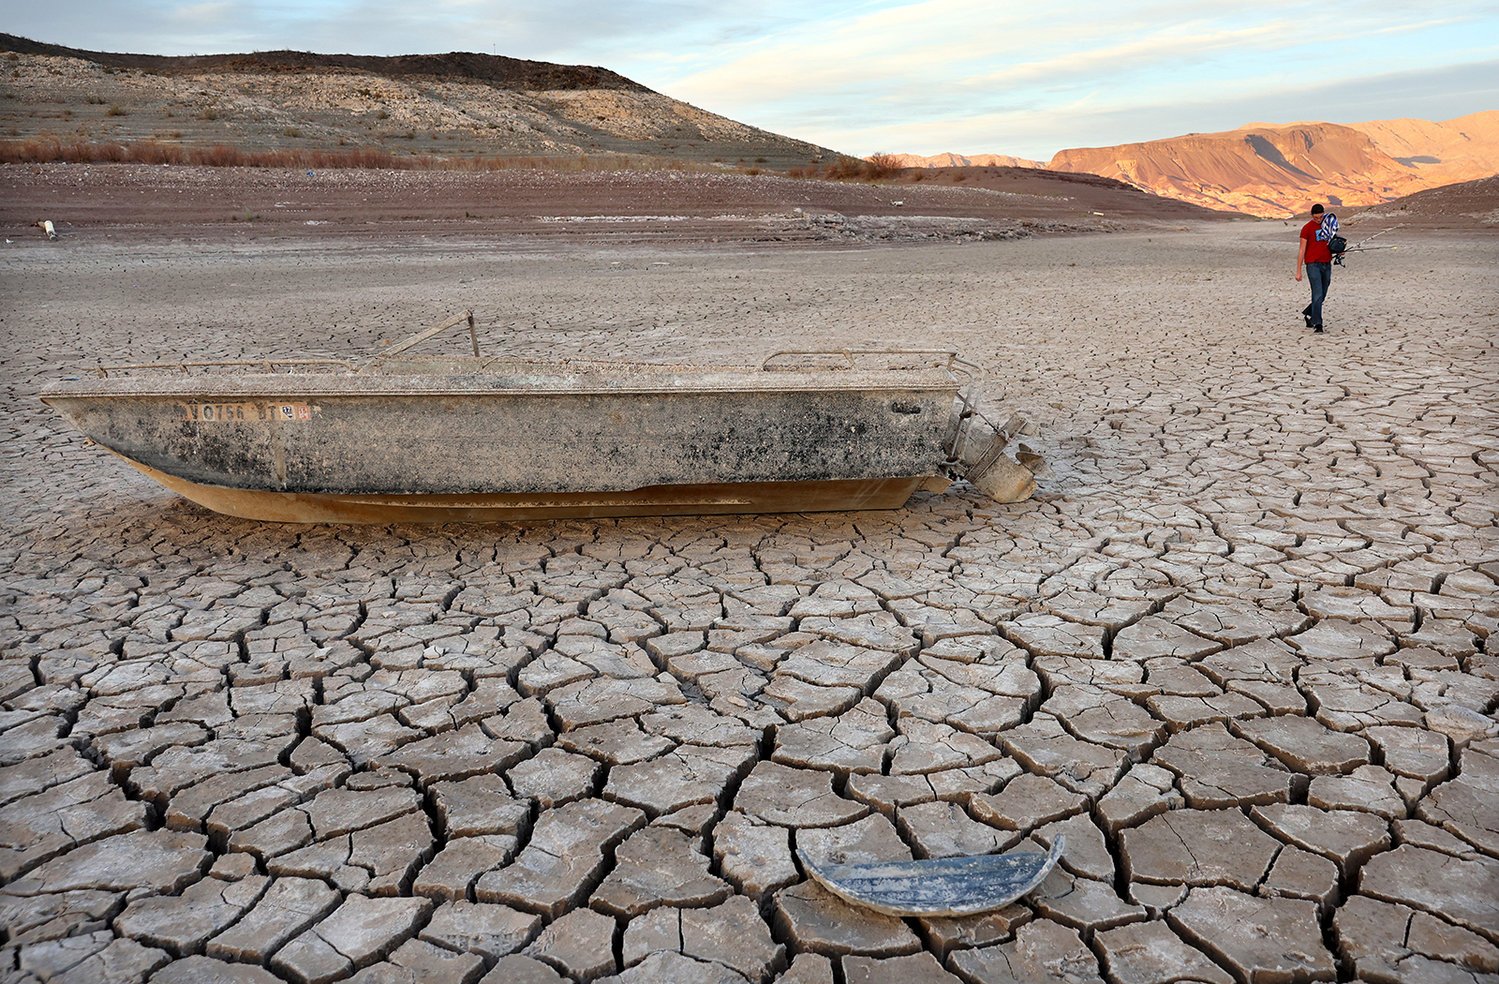 A person who was fishing nearby walks past a formerly sunken boat resting on a now-dry section of lakebed at the drought-stricken Lake Mead on May 10, 2022, in the Lake Mead National Recreation Area, Nevada. The U.S. Bureau of Reclamation reported that Lake Mead, North America's largest artificial reservoir, has dropped to about 1,052 feet above sea level, the lowest it's been since being filled in 1937 after the construction of the Hoover Dam. (Mario Tama/Getty Images/TNS)